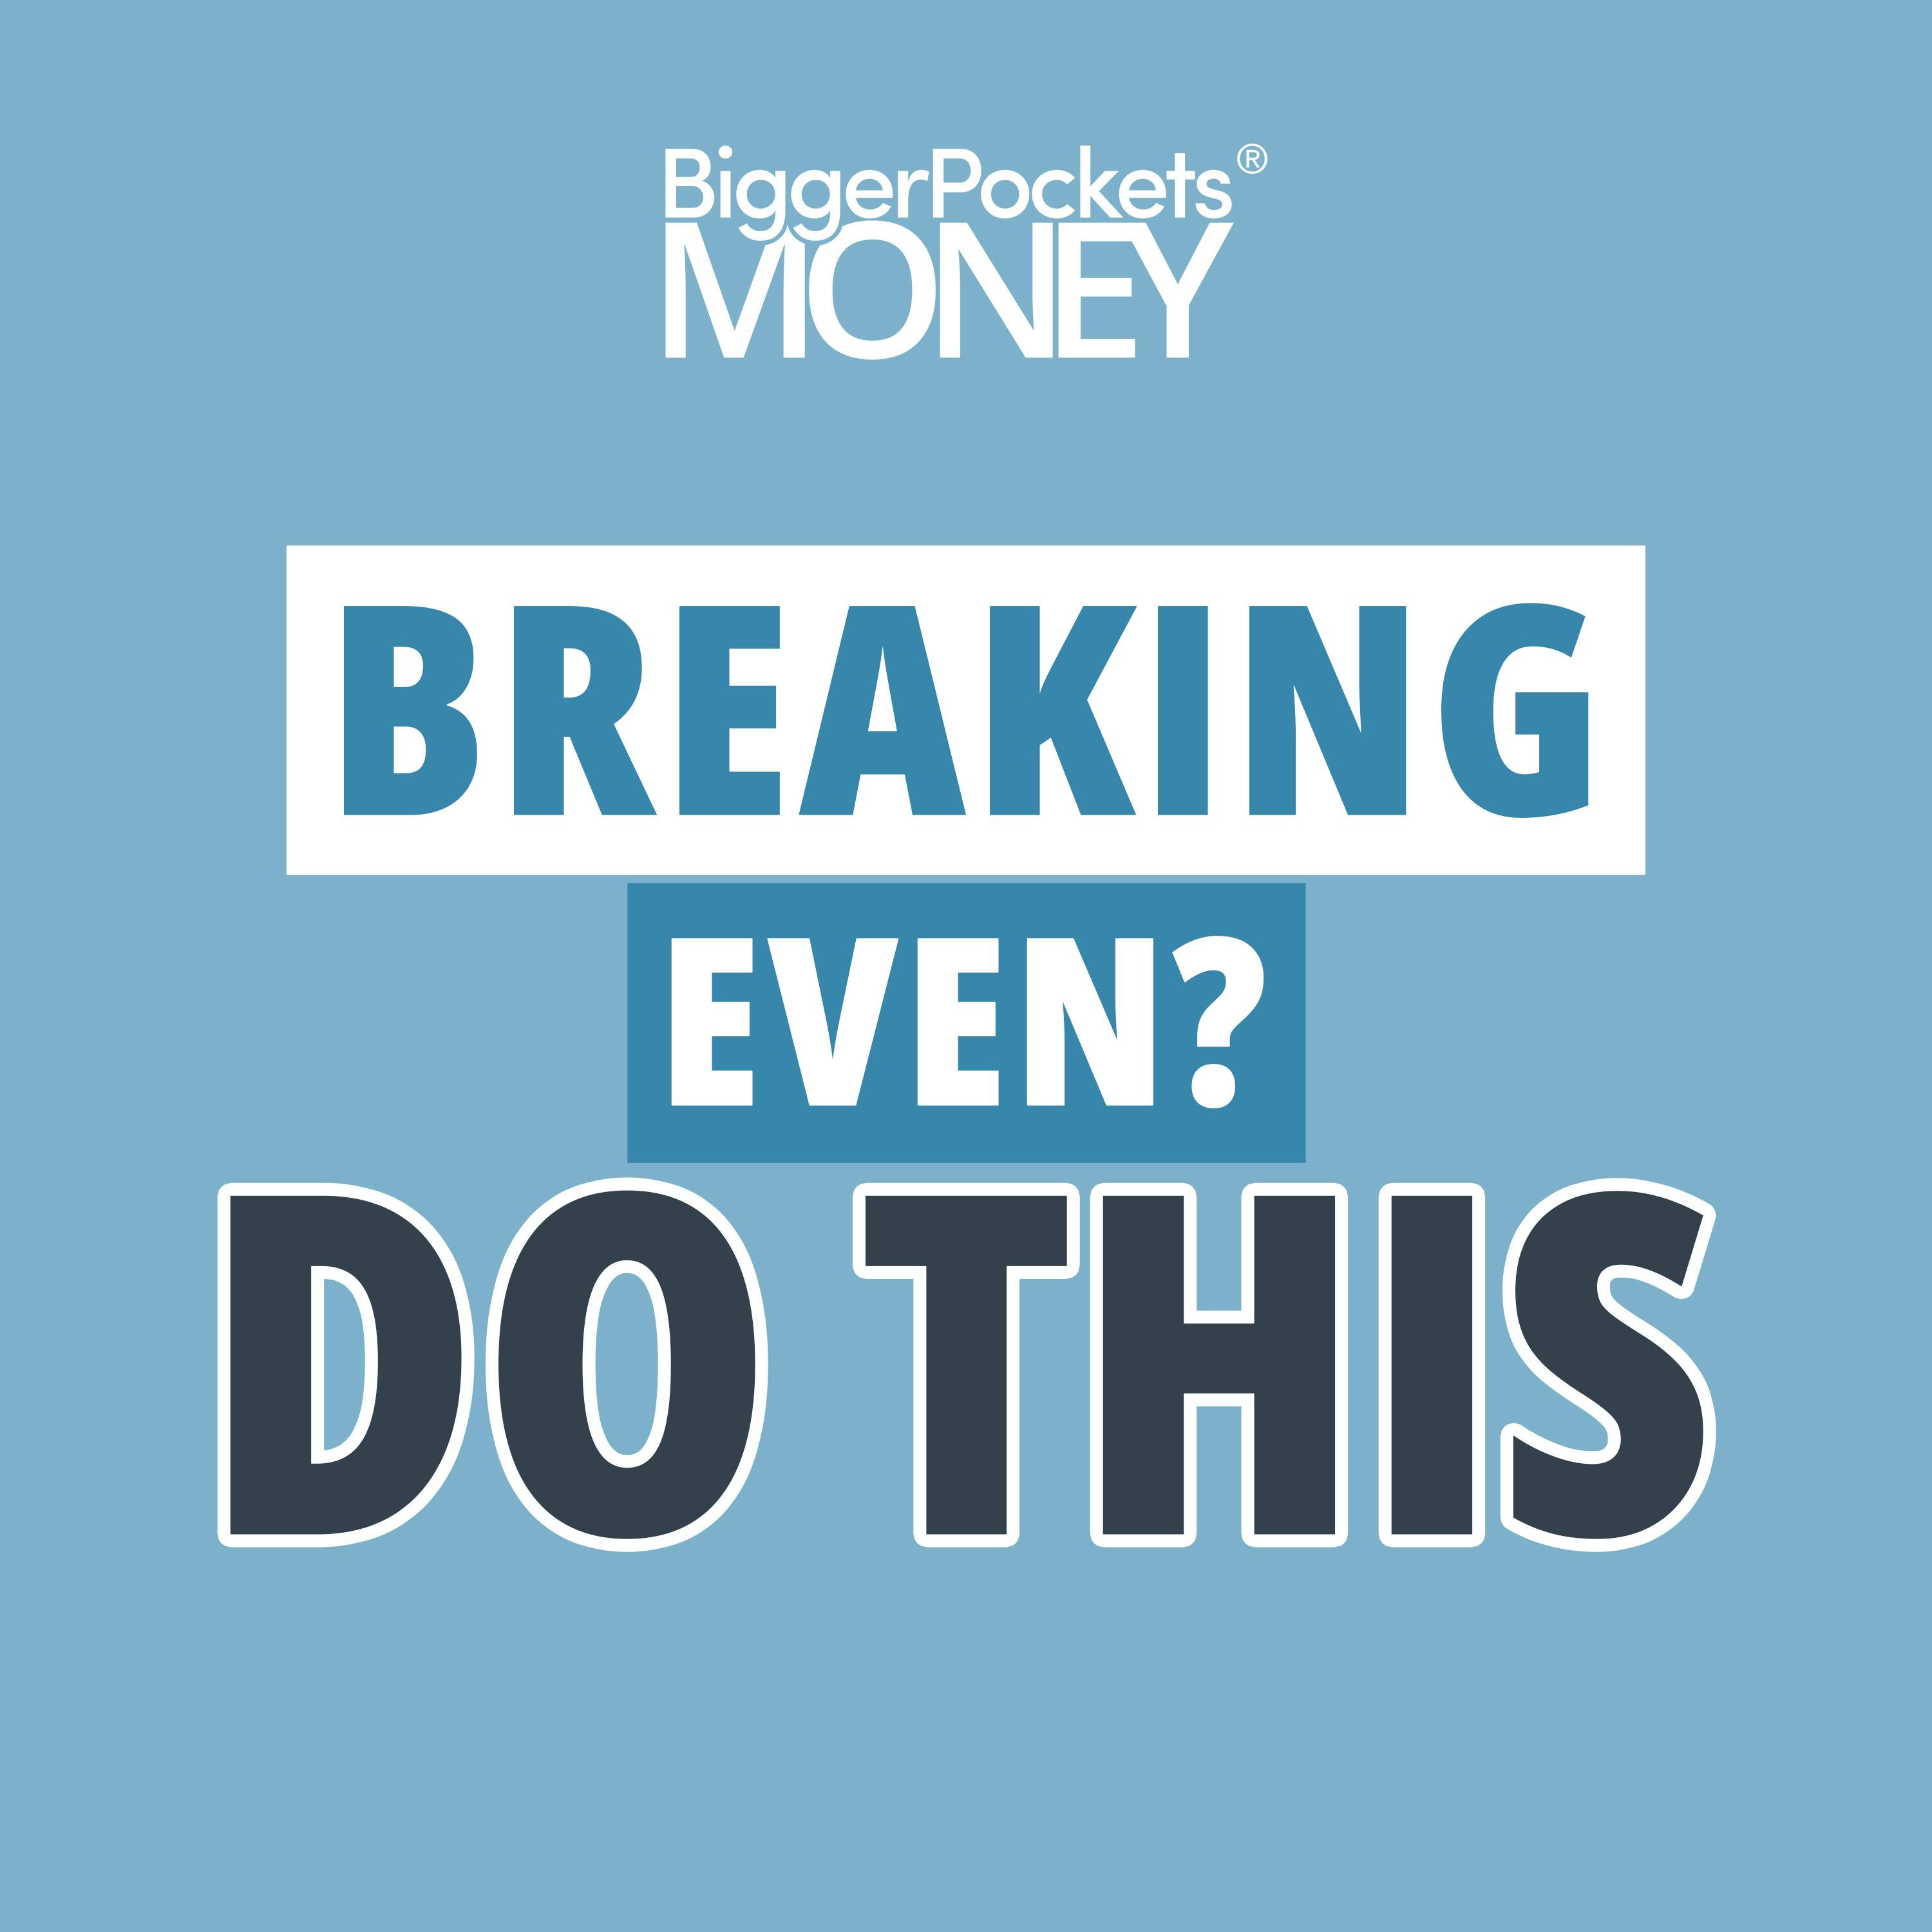 419: Finance Friday: Barely Breaking Even? Here’s How You Can STILL Invest